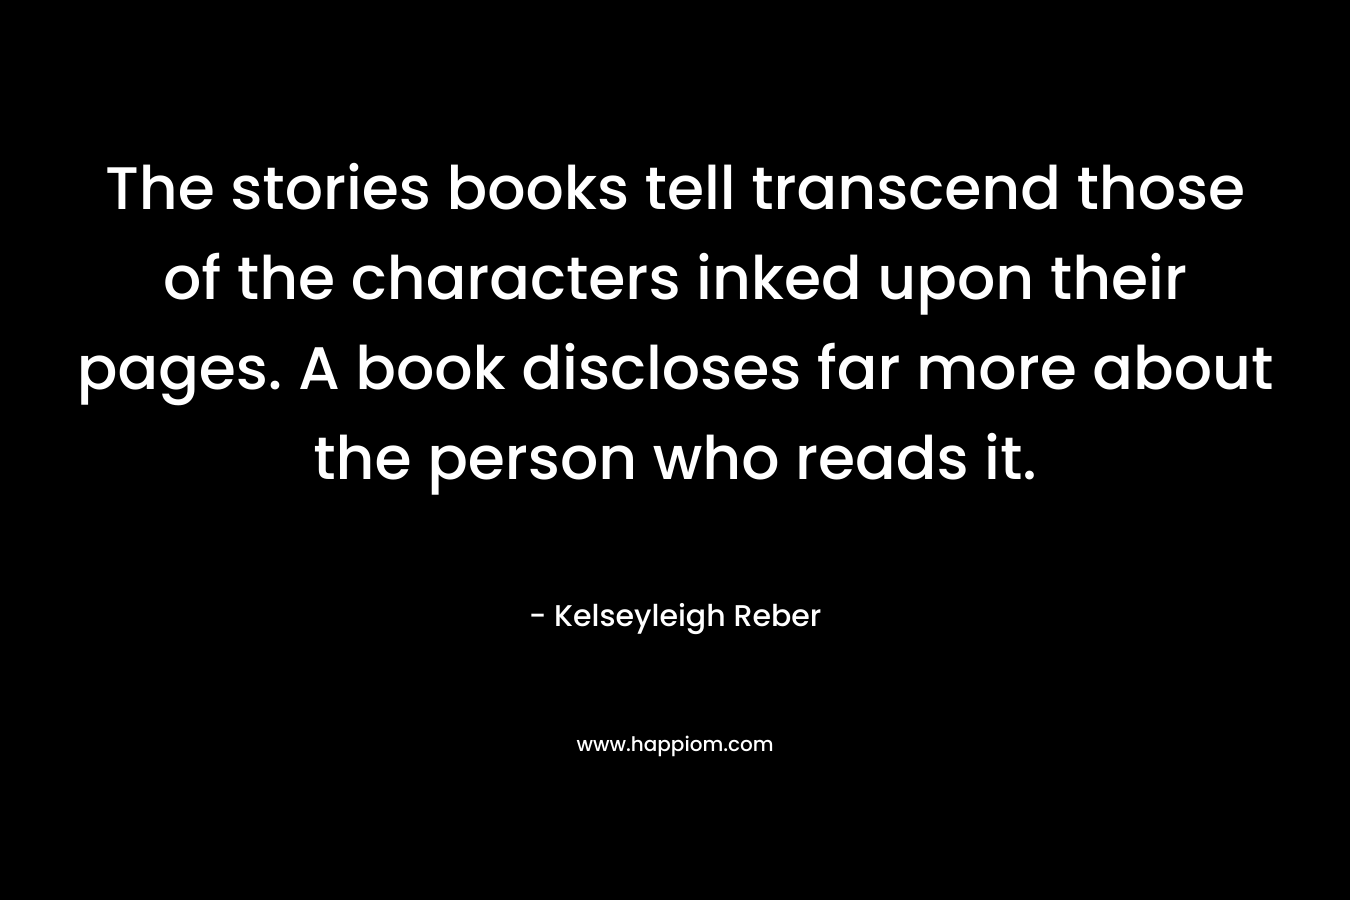 The stories books tell transcend those of the characters inked upon their pages. A book discloses far more about the person who reads it.